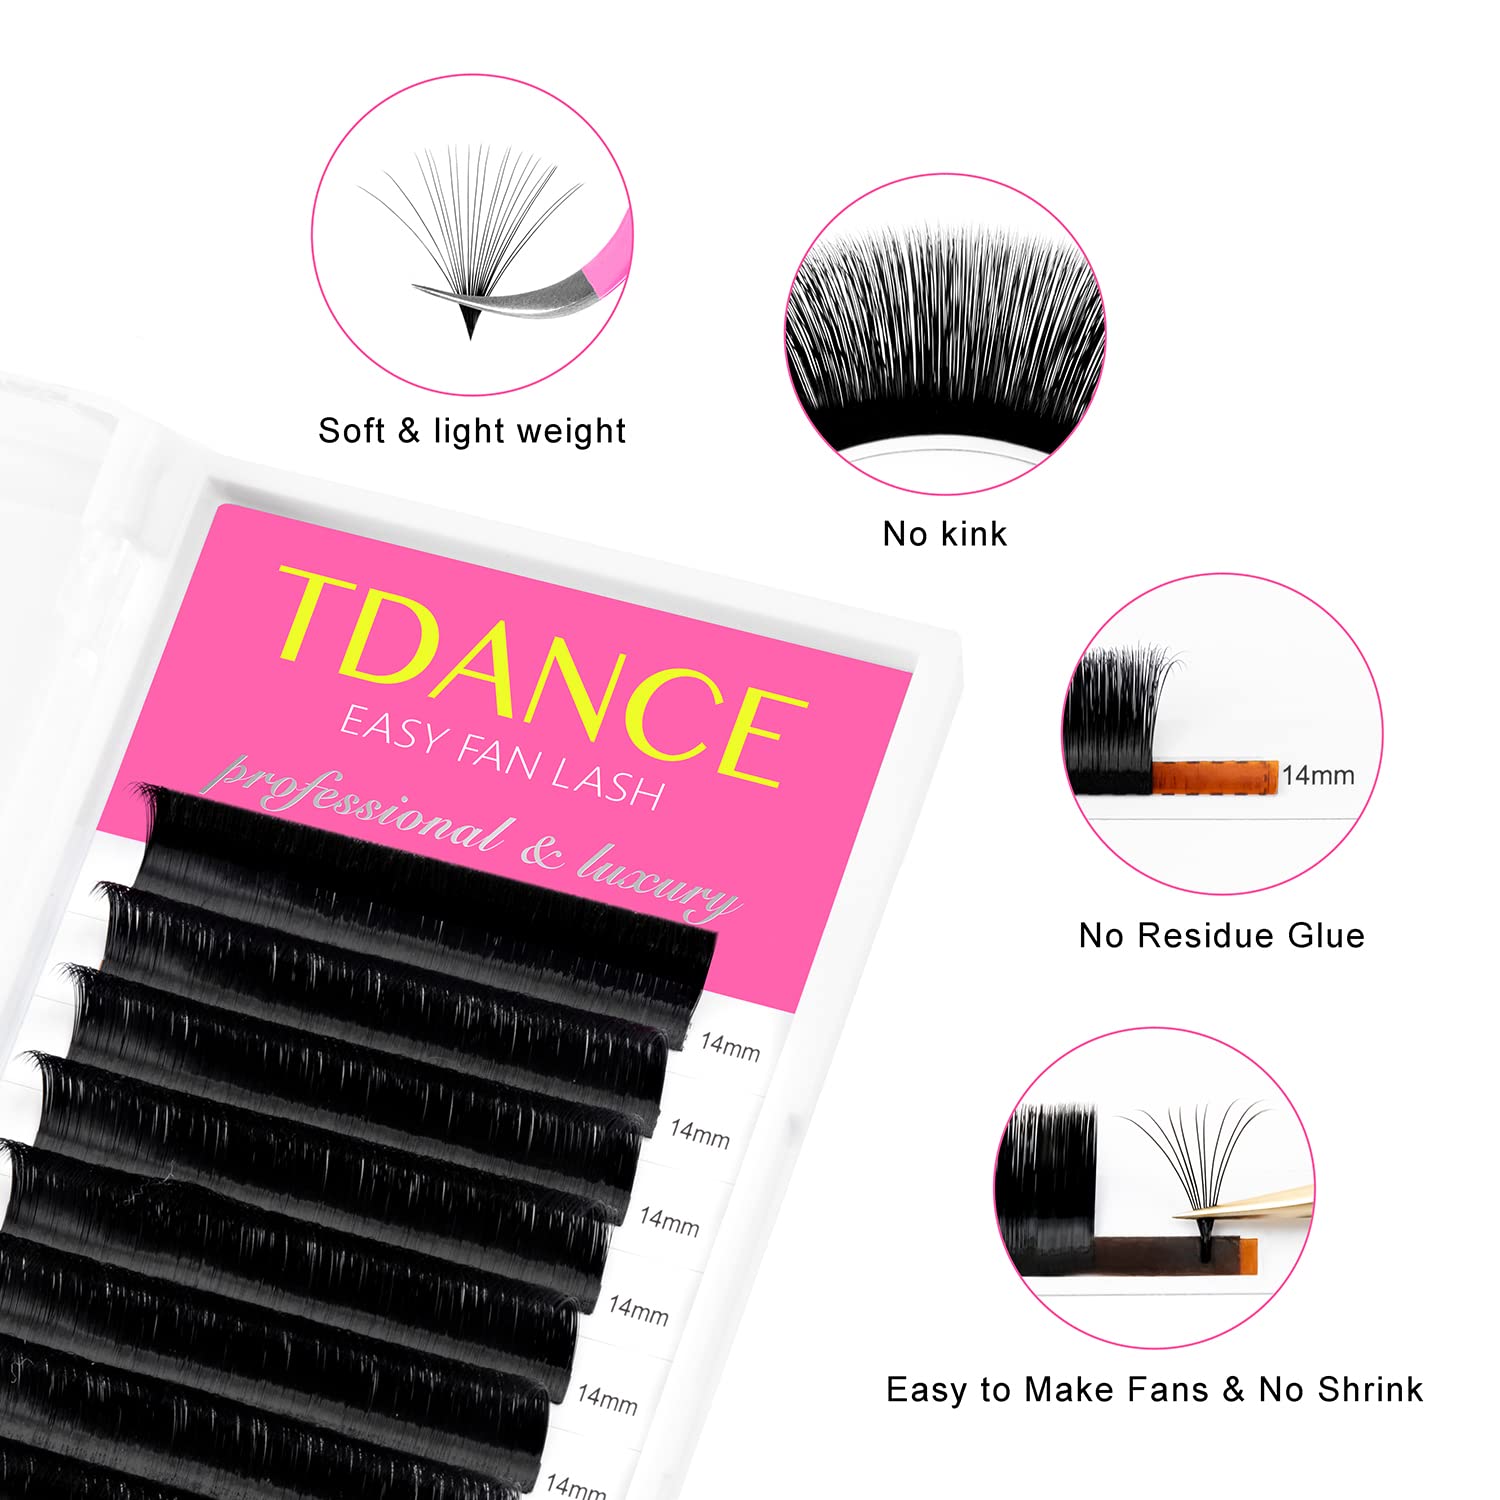 TDANCE Eyelash Extension Supplies Rapid Blooming Volume Eyelash Extensions Thickness 0.05 CC Curl 13mm Easy Fan Volume Lashes Self Fanning Individual Eyelashes Extension (CC-0.05,13mm)